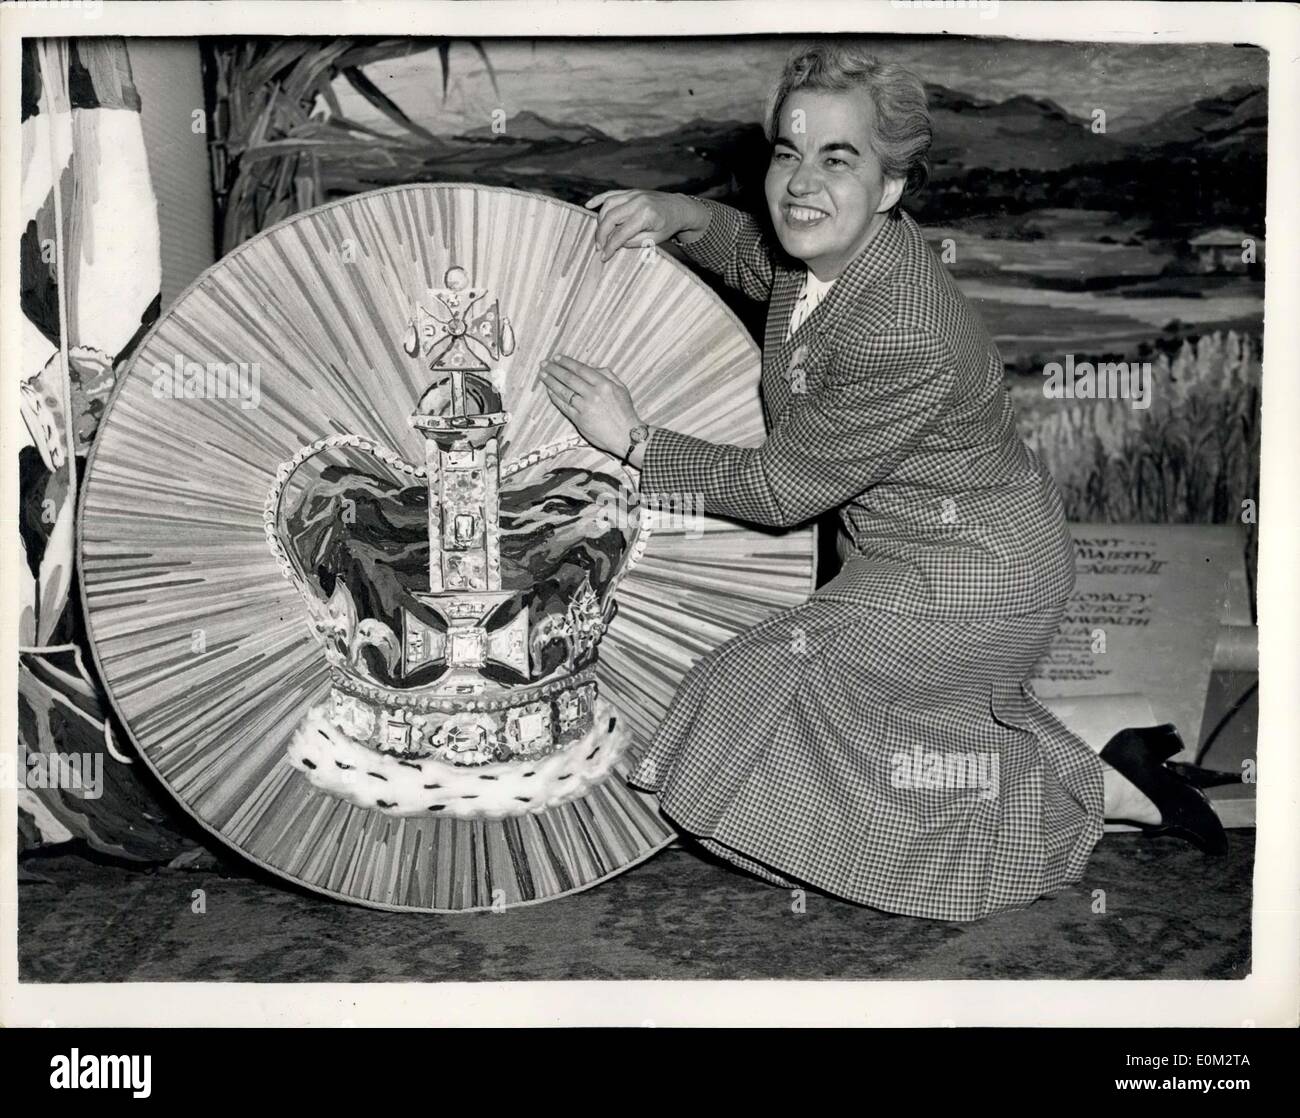 May 13, 1953 - Coronation Window Display By Australian Artist. Designs In Wool - At Queensland House: A press preview was held this afternoon at Queensland House, Strand - of the Coronation Window Display - the work in wool - by Australian artist Edith Kenton from Adelaide. Photo shows Edith Kenton puts the finishing touches to one of the Wool crowns - at Queensland House this afternoon. Stock Photo